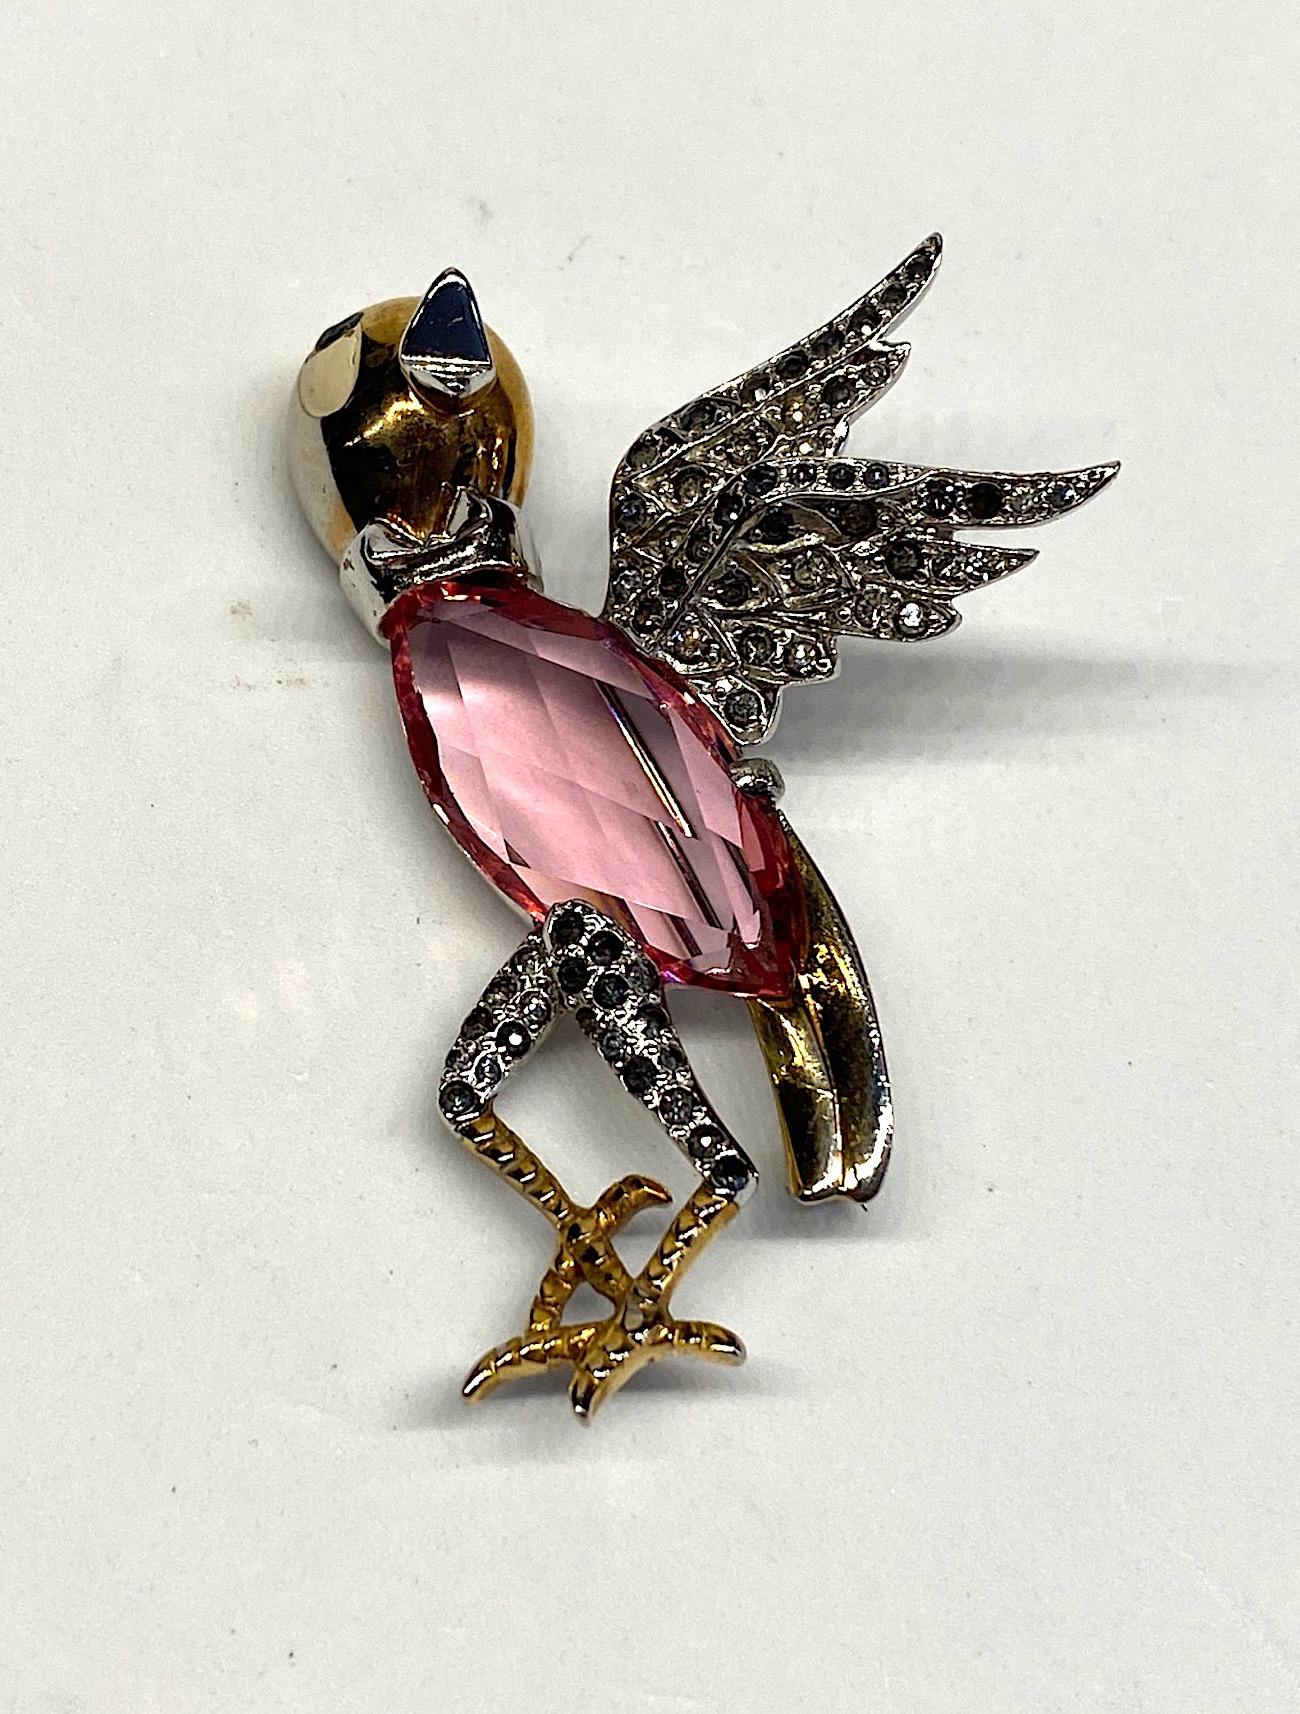 A charming figural brooch of a bird chirping from the 1940s. The head, tail and feet are gold plated while the wings, collar and thighs are rhodium plated. The wings and thighs are set with rhinestones. Most have darkened over time. The head has a